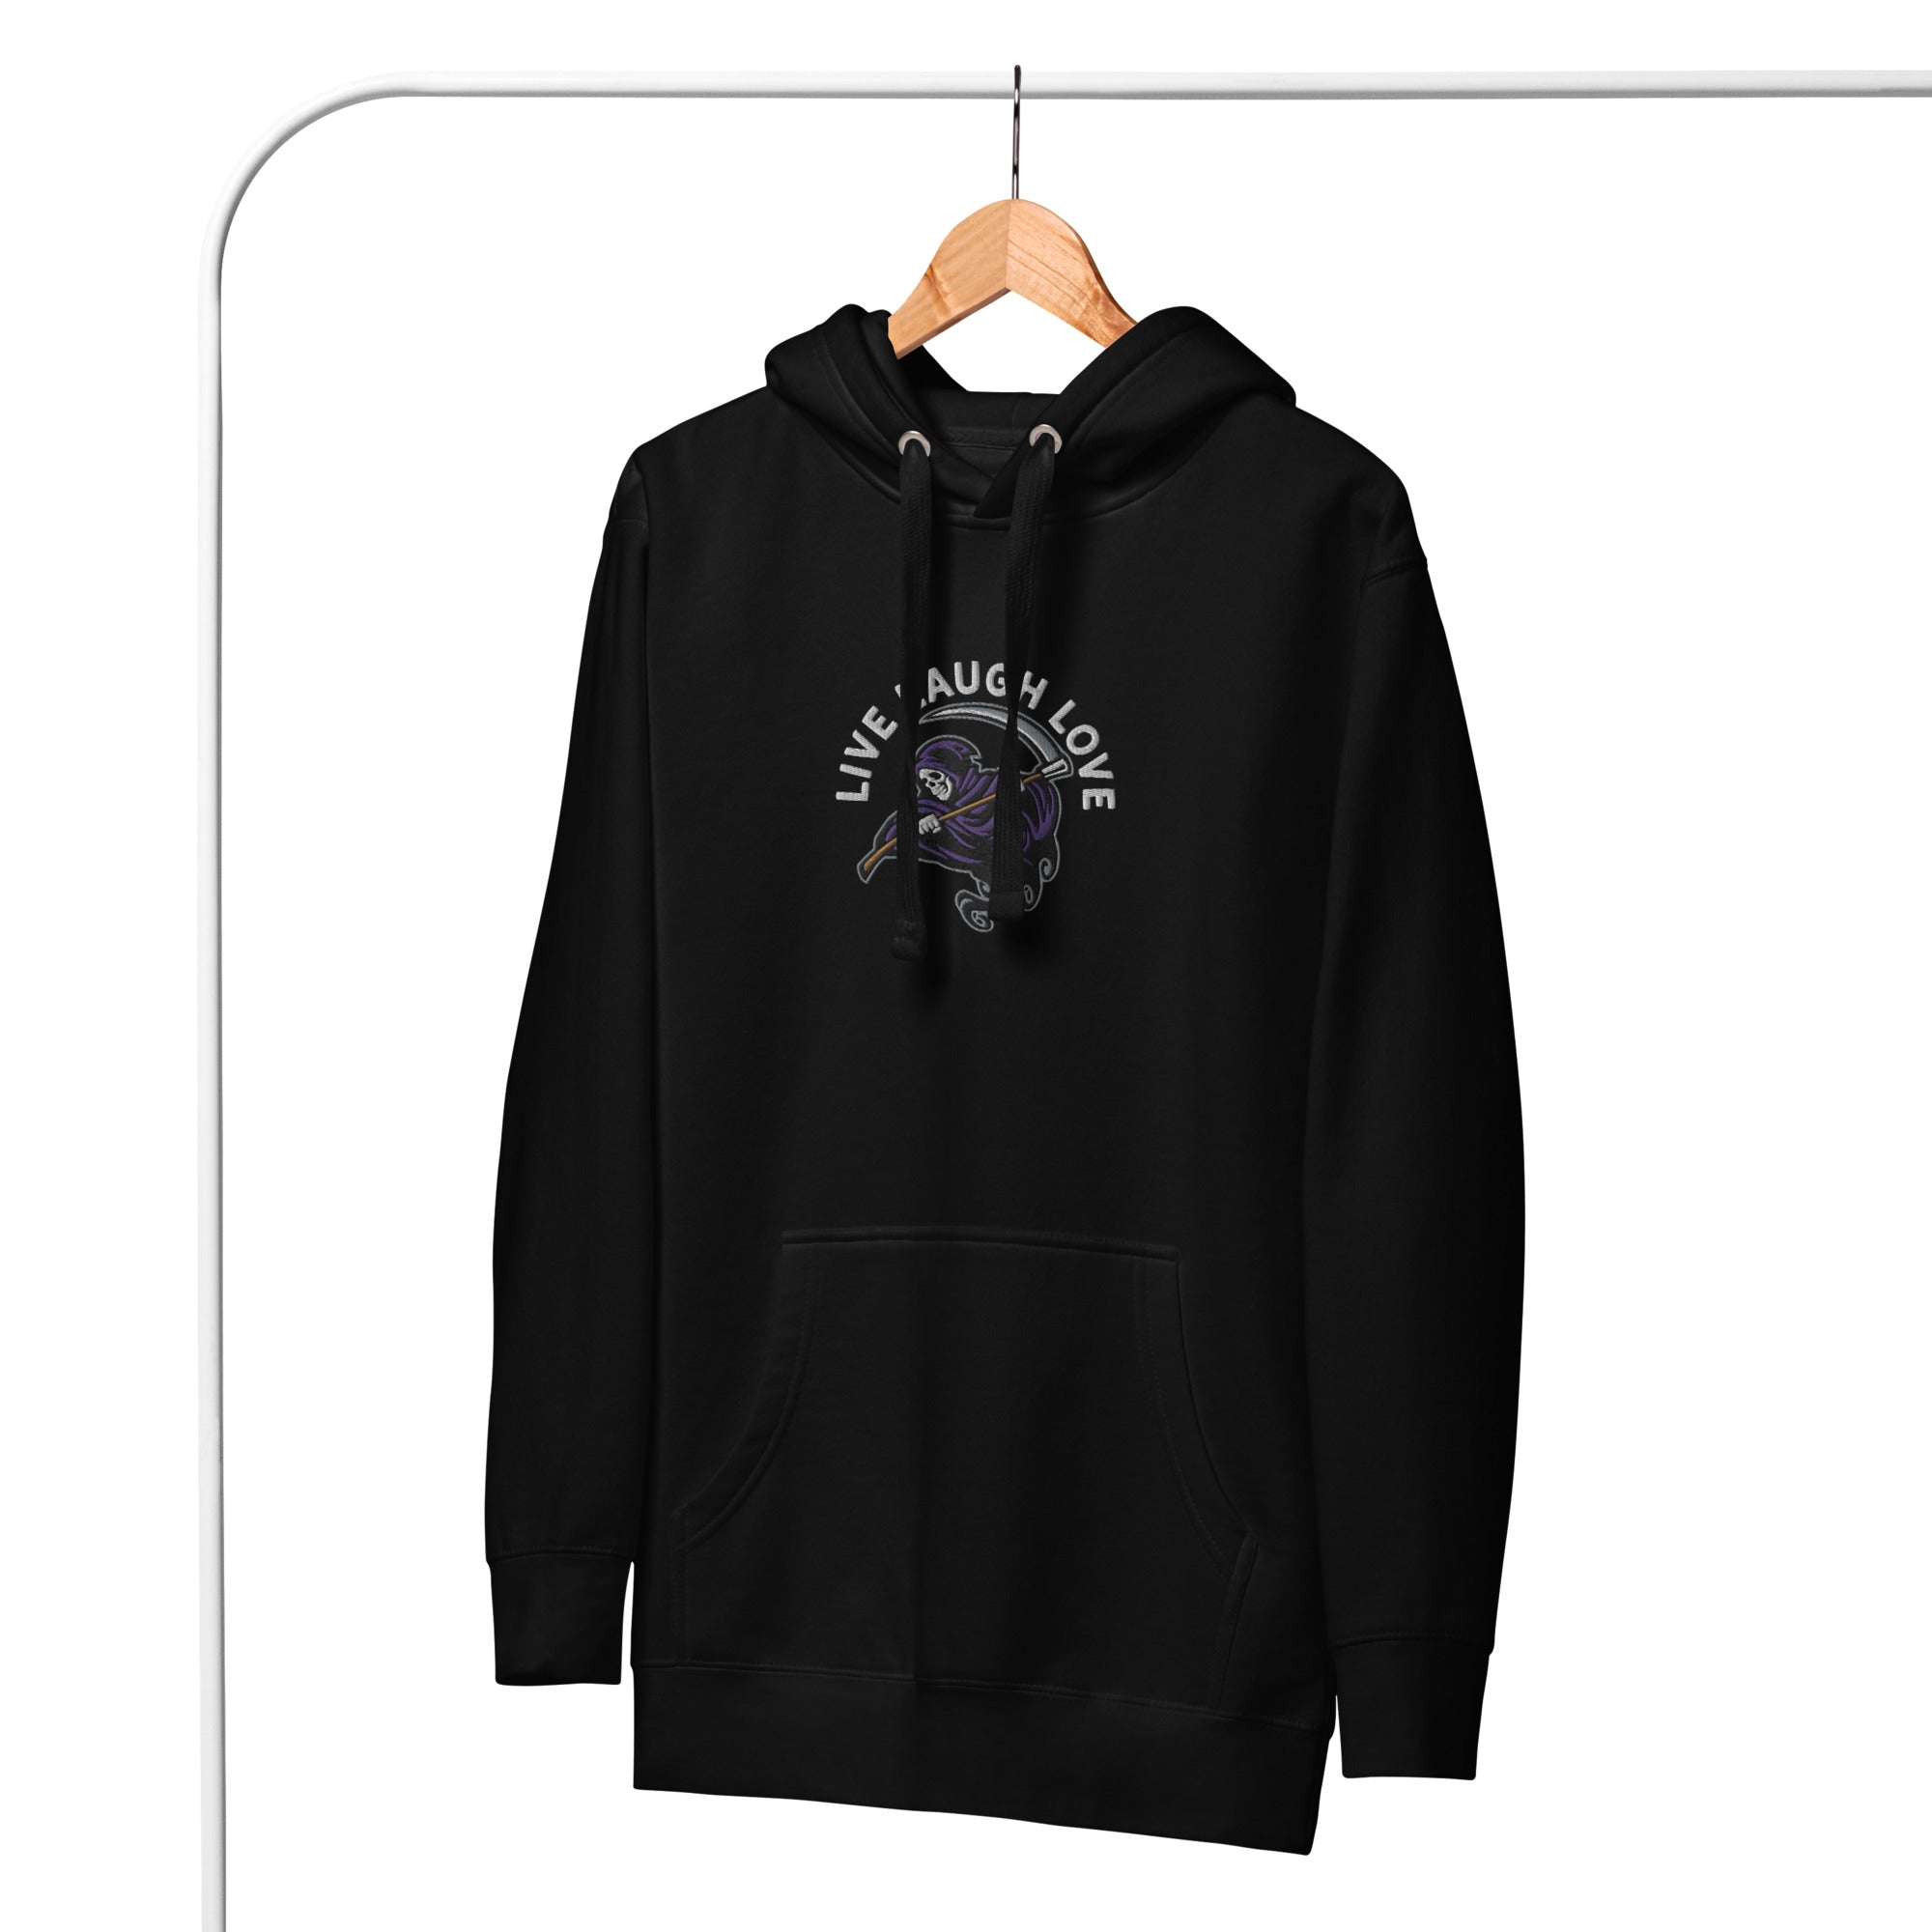 Live Laugh Love Grim Reaper Embroidered Hoodie